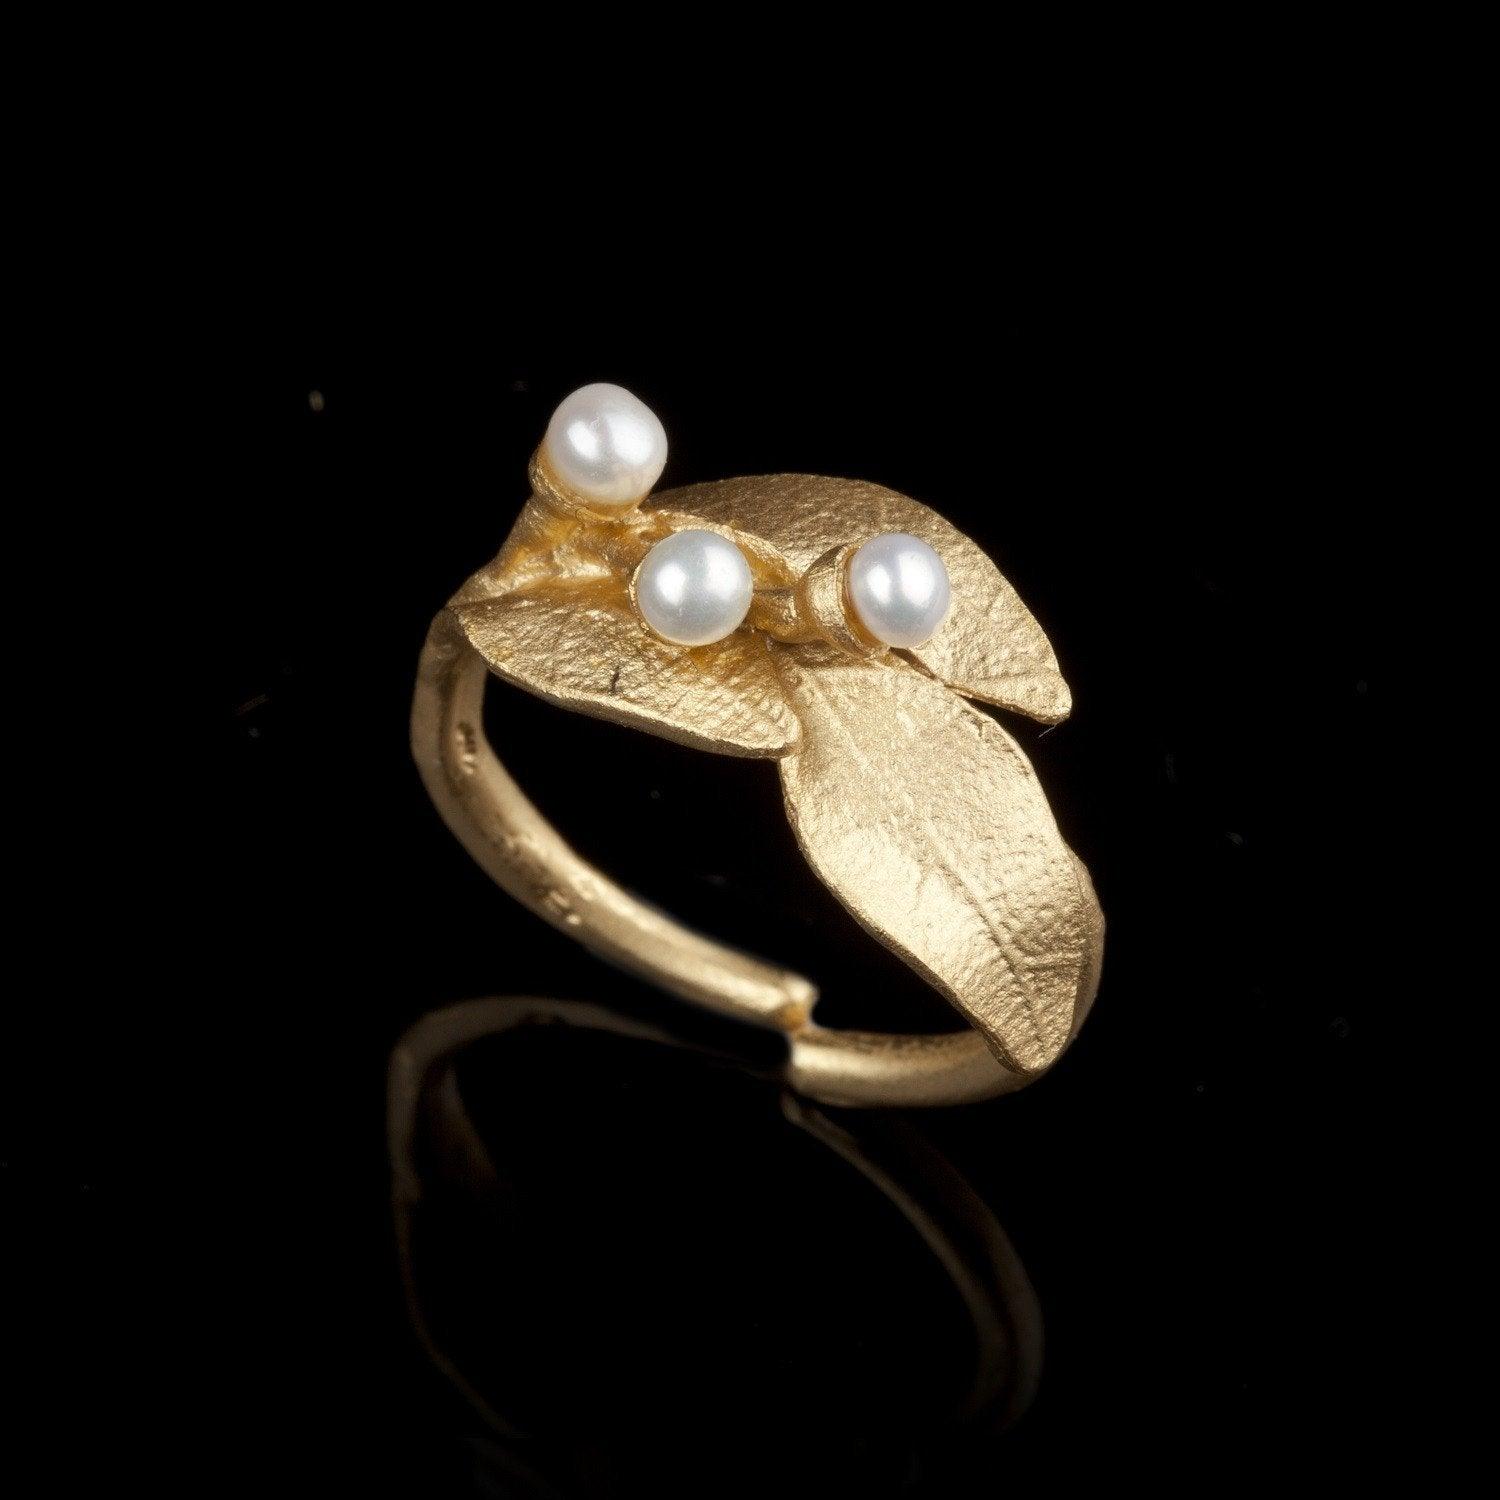 The Bay Laurel ring is cast in bronze with 24kt. gold plate and accented with white freshwater pearls.